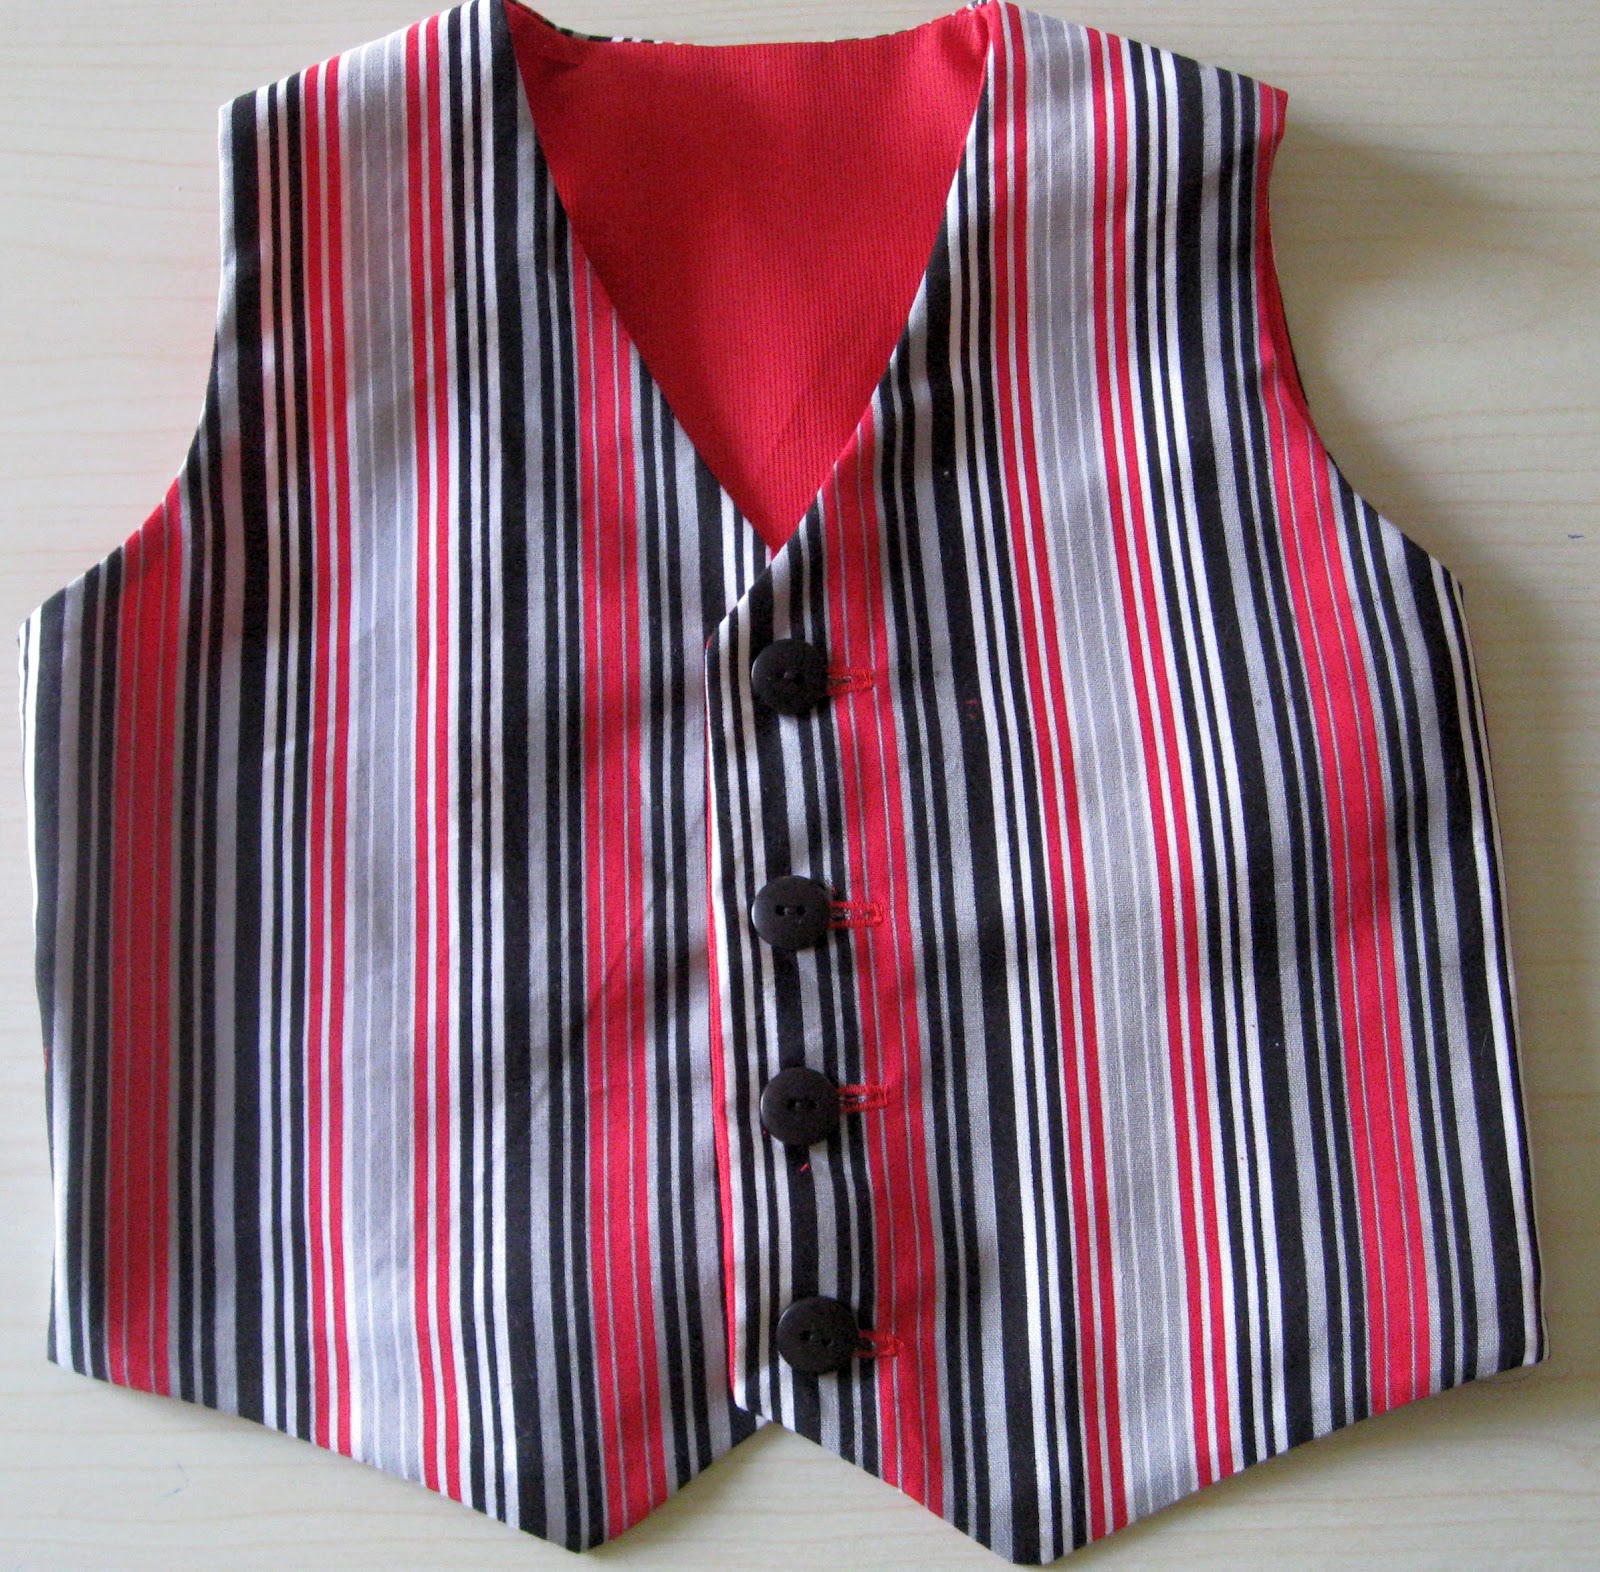 vicki-s-fabric-creations-child-s-vest-pattern-and-tutorial-uploaded